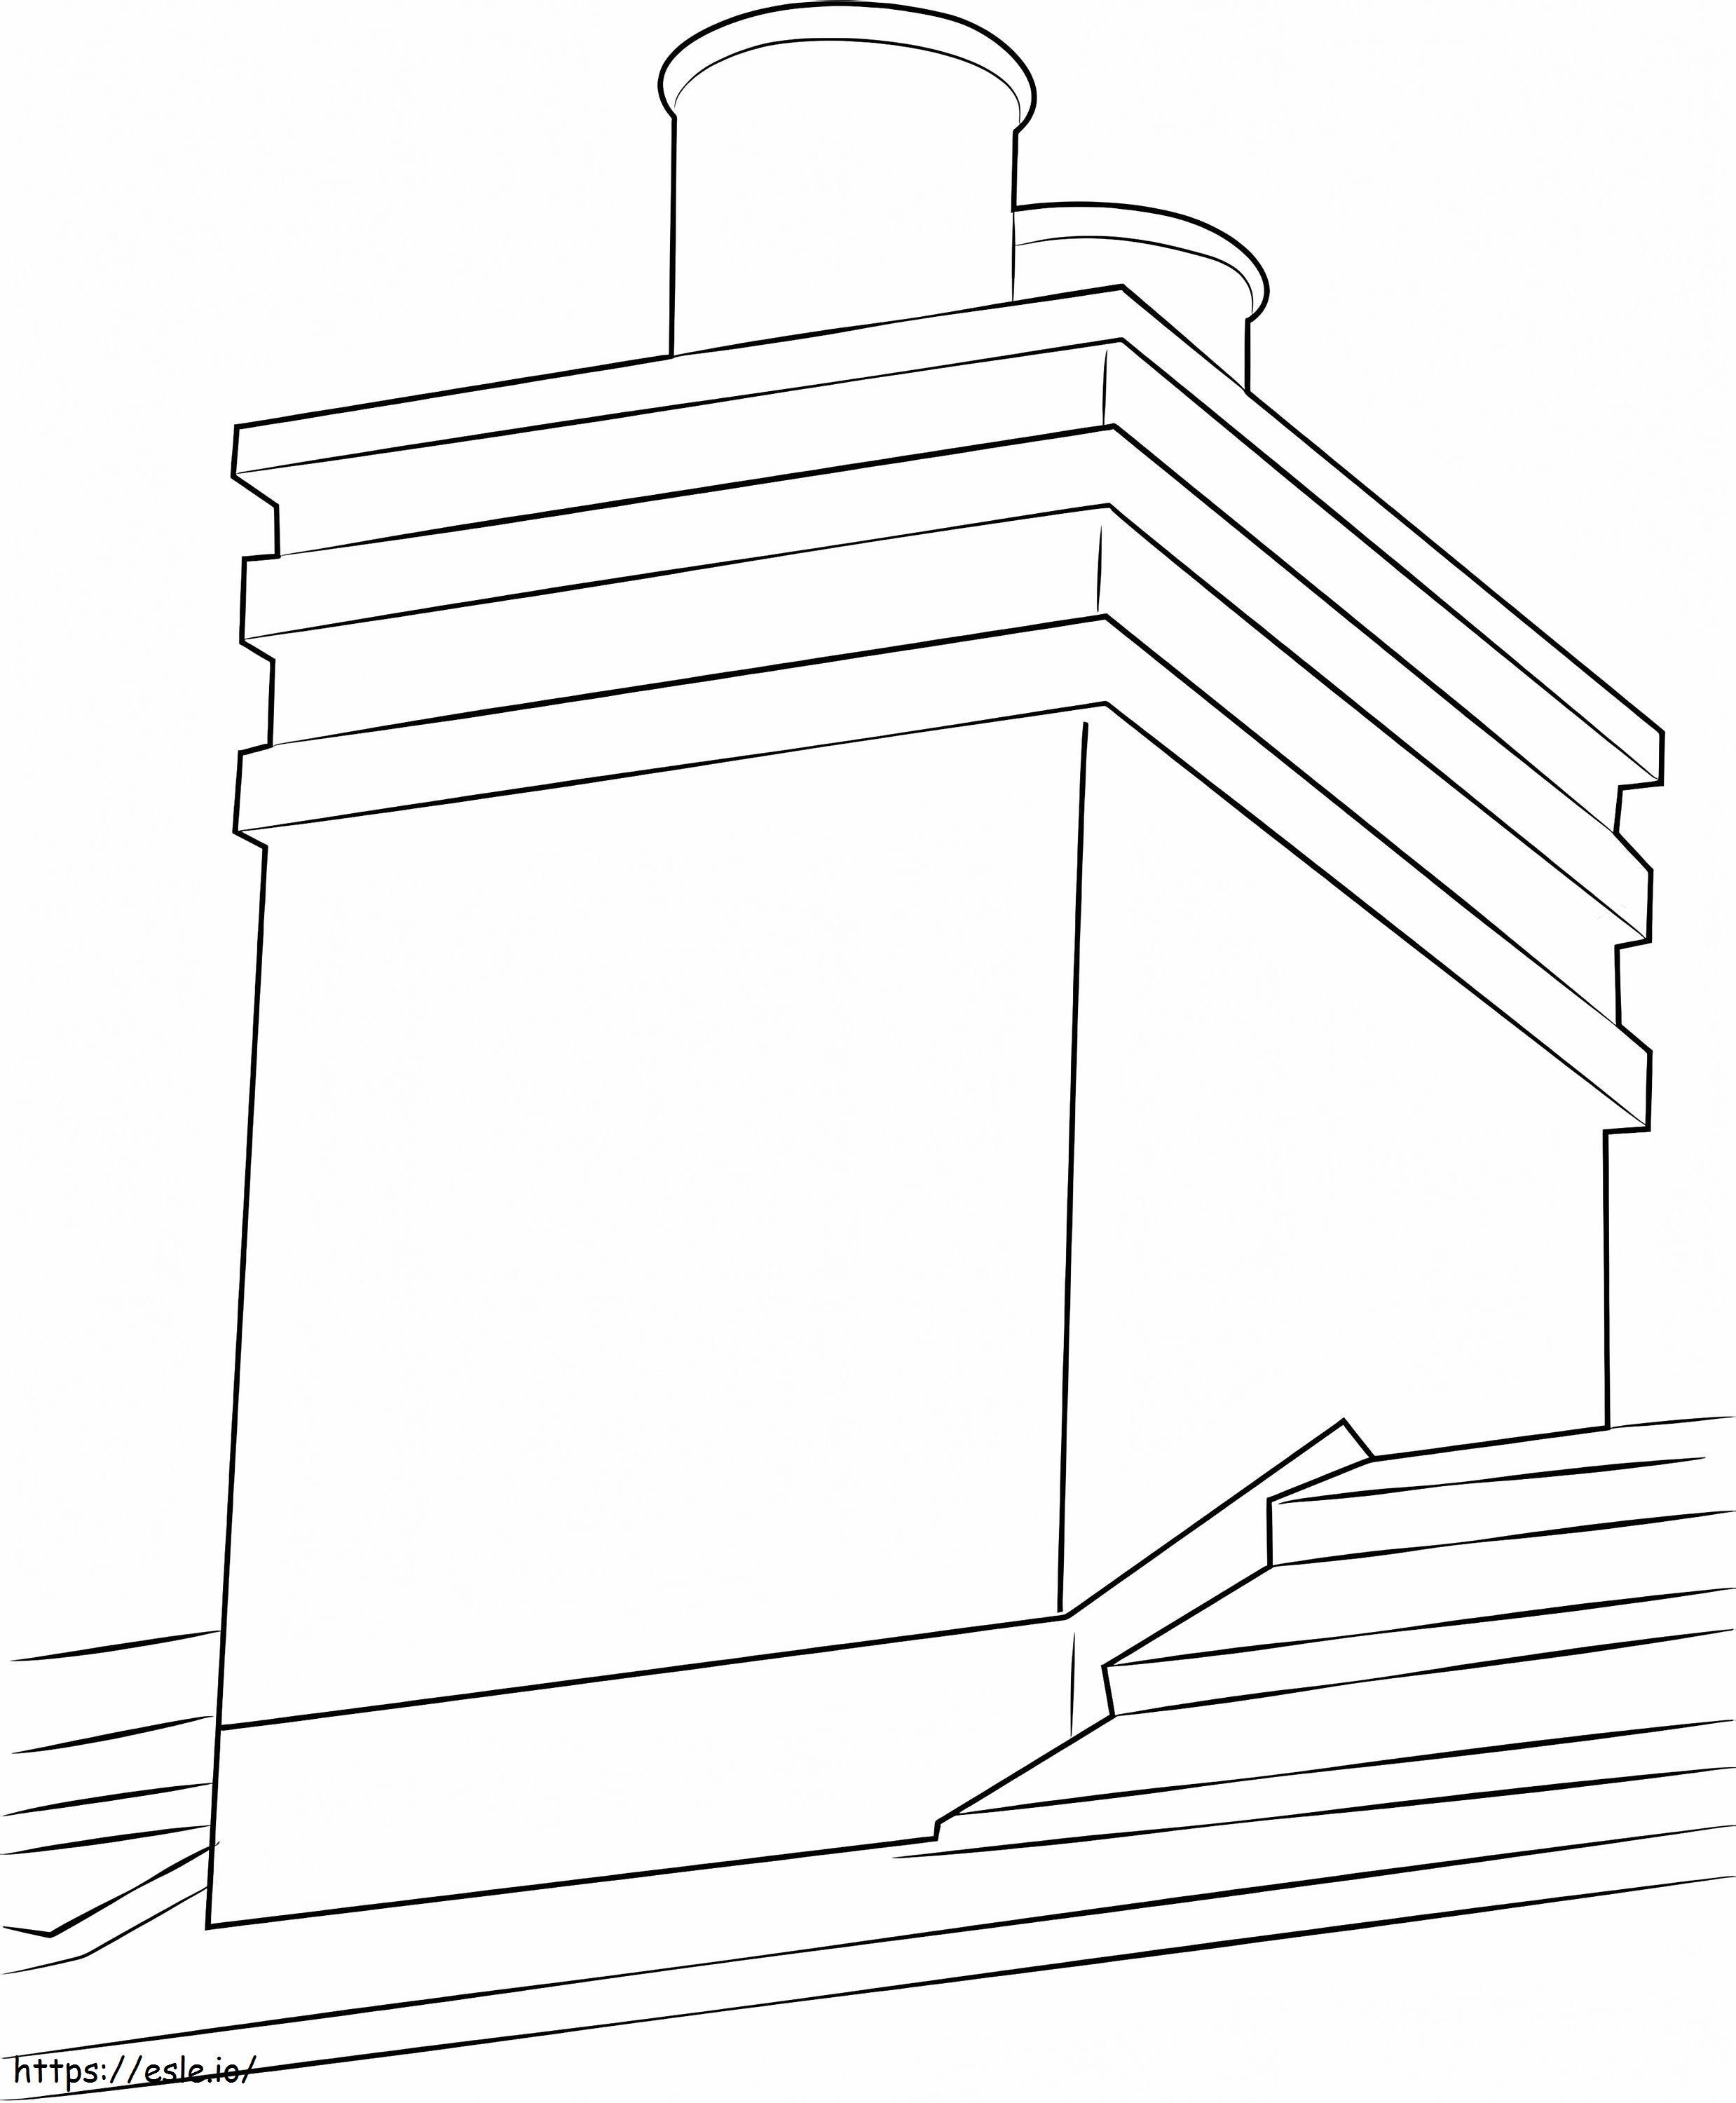 Miss Chimney coloring page